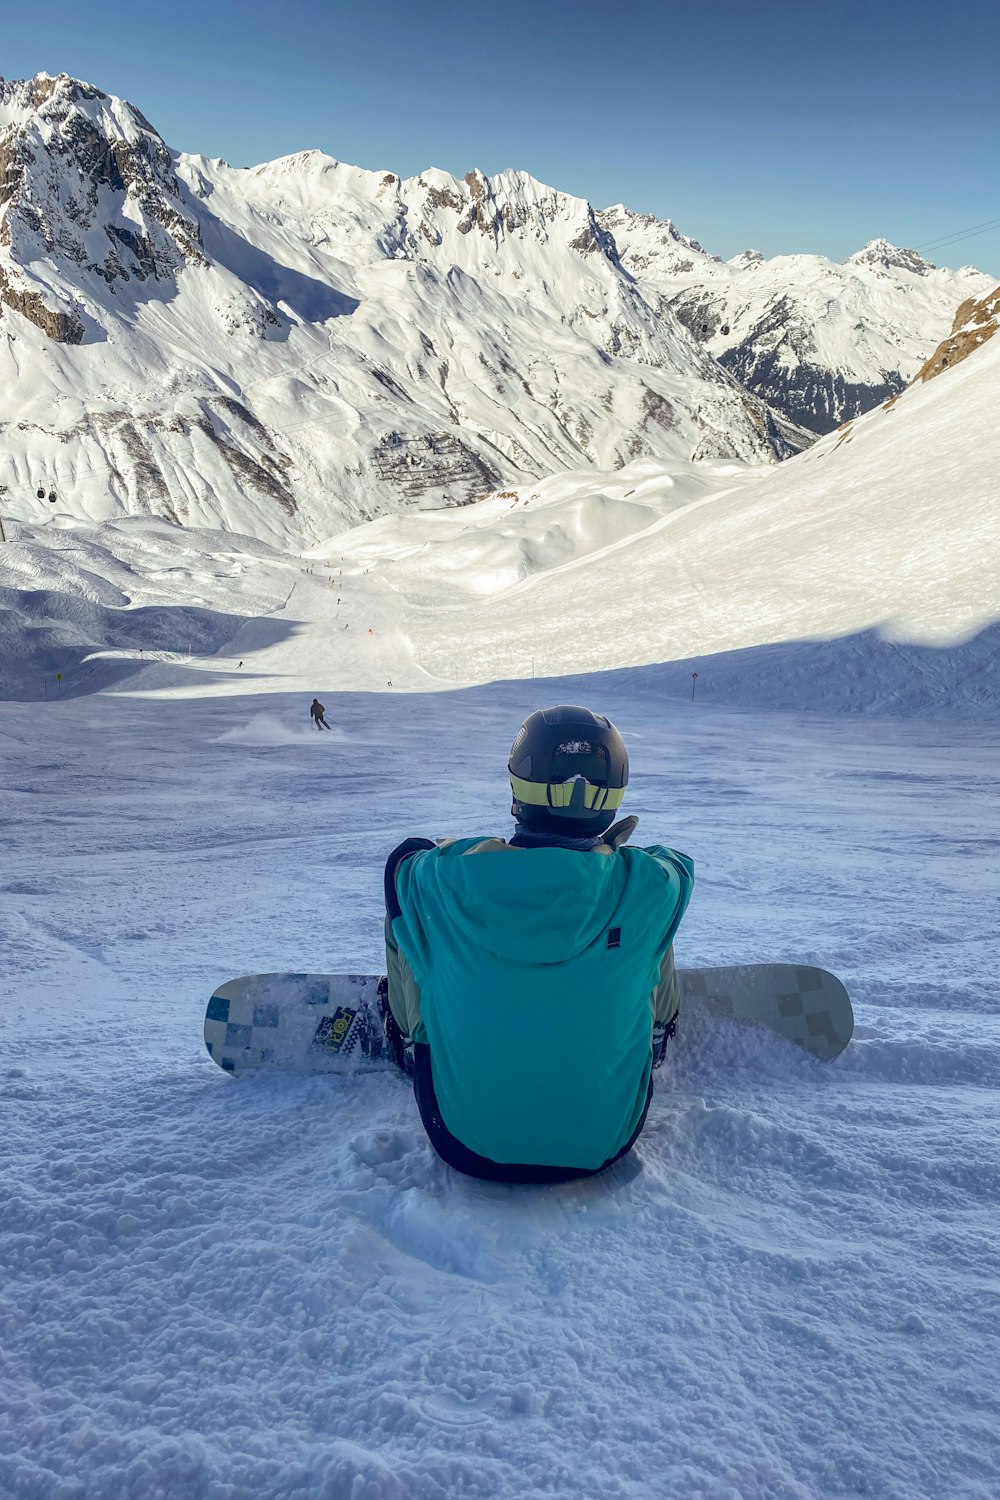 a person sitting in the snow with a snowboard